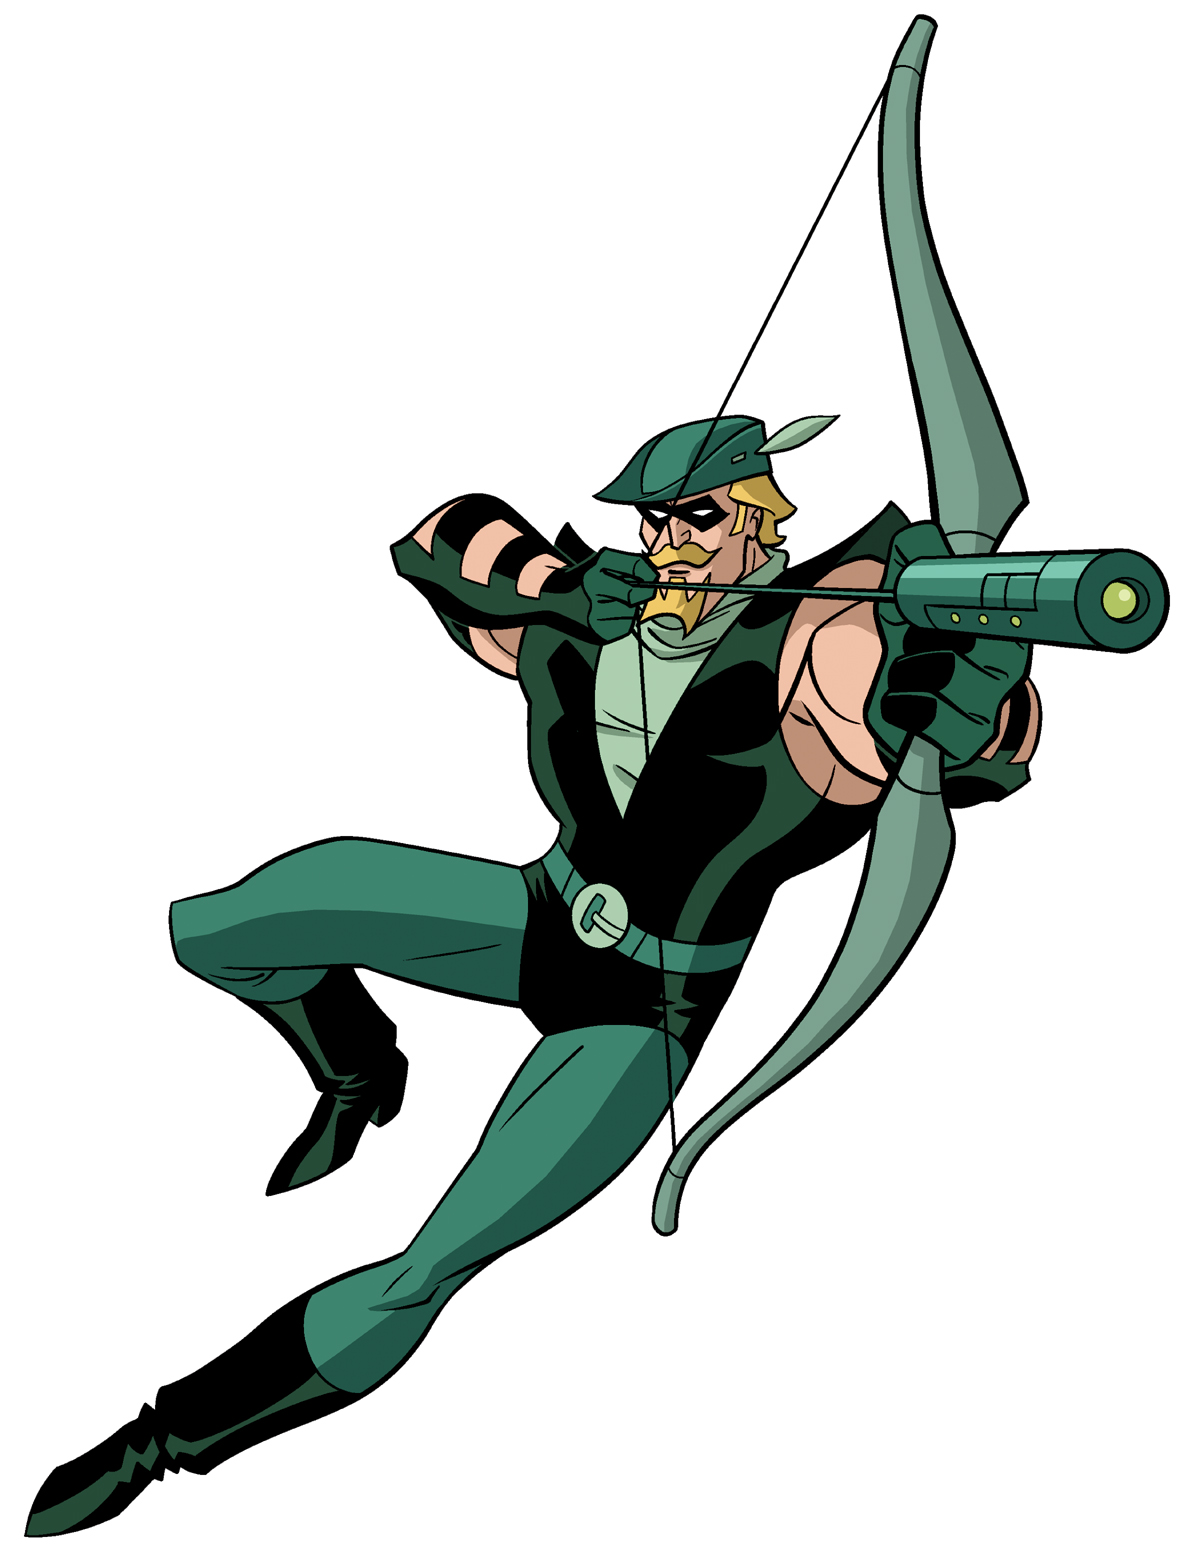 How To Draw DC Heroes - Green Arrow by TimLevins on DeviantArt